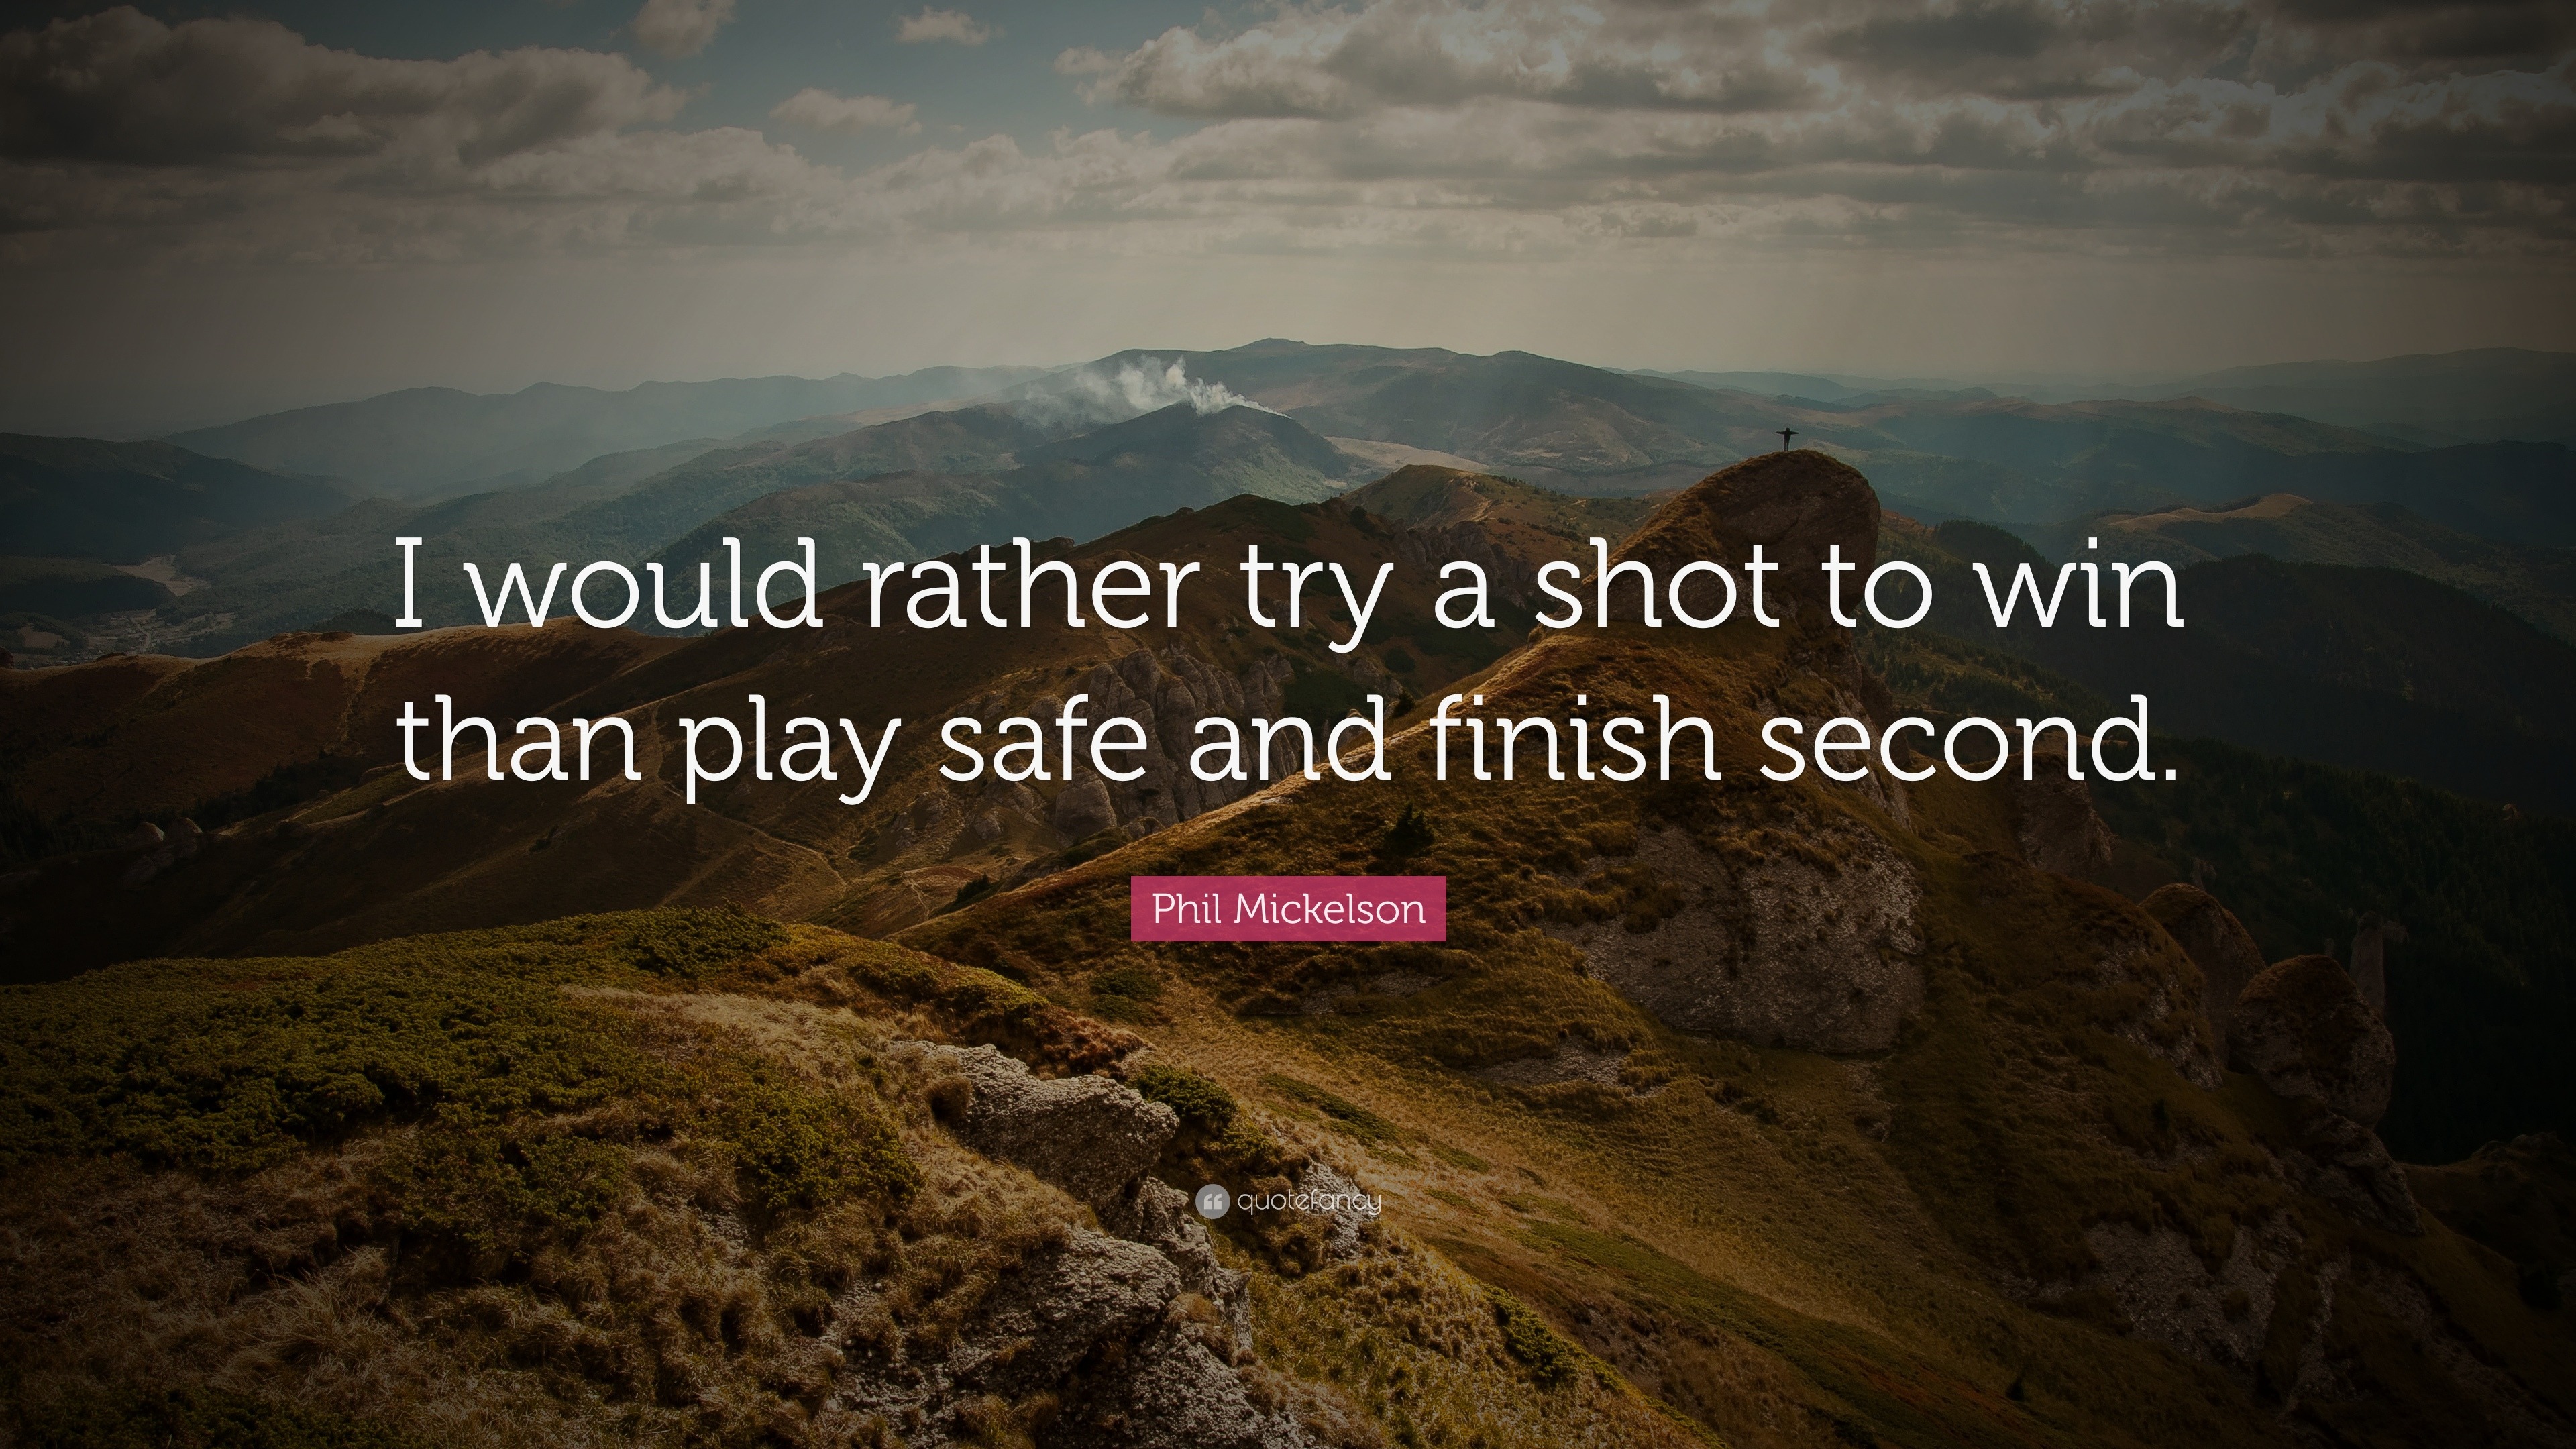 Phil Mickelson Quote: “I would rather try a shot to win than play safe and  finish